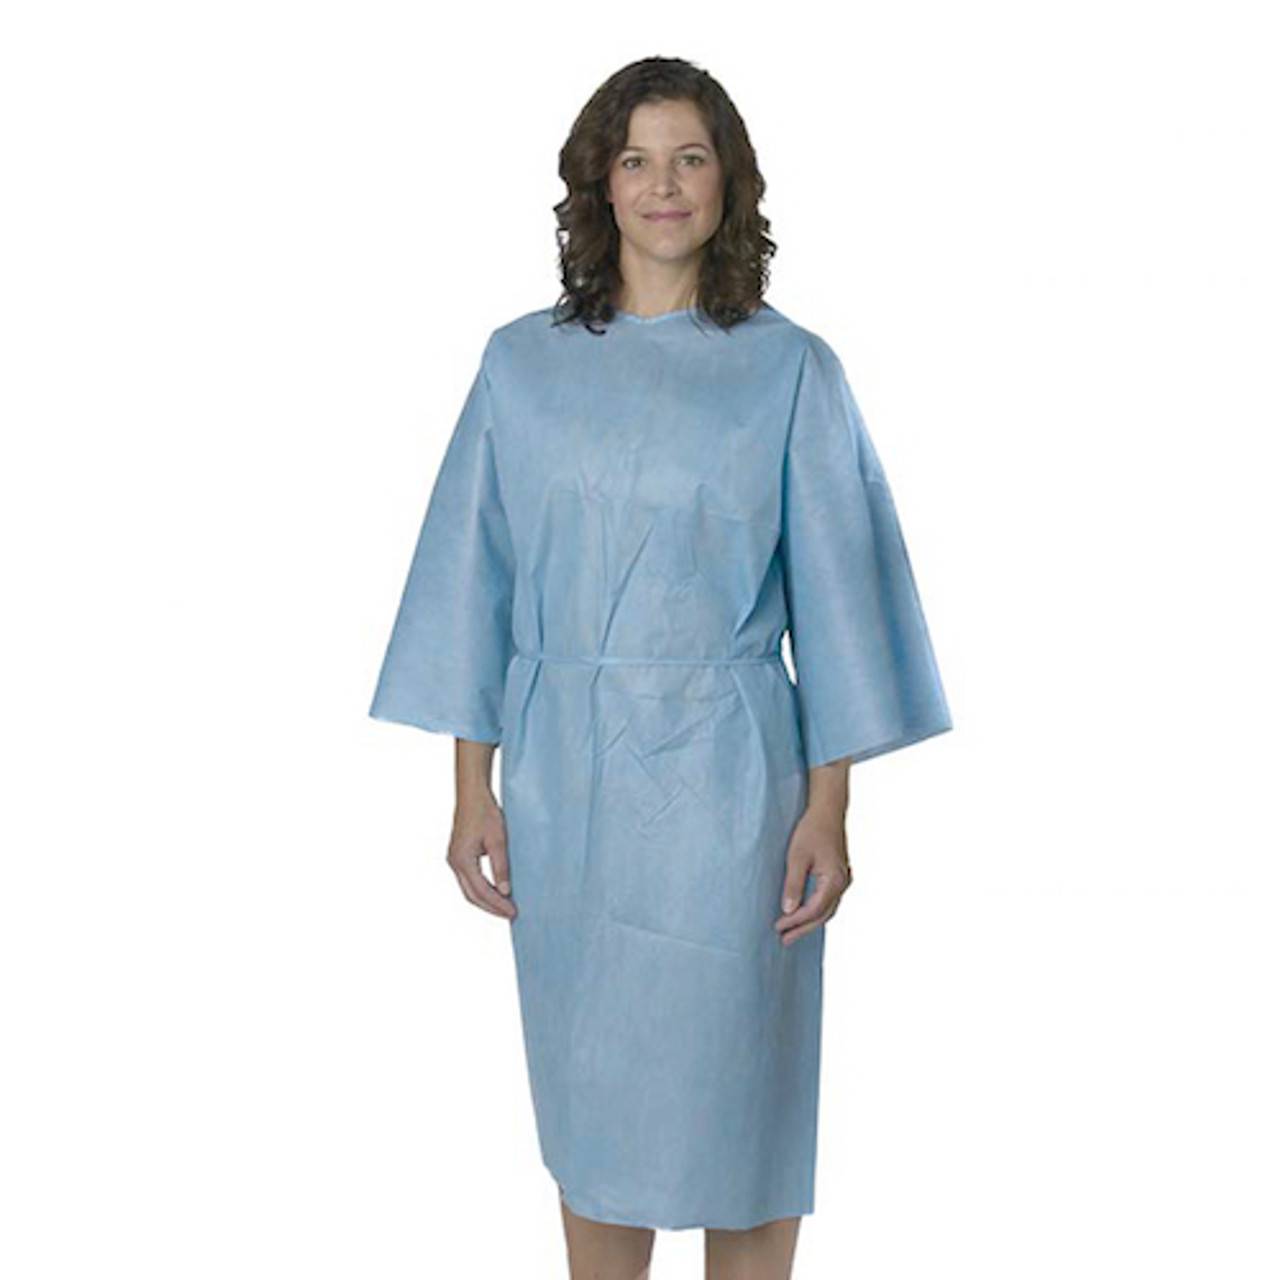 Global Hospital Gowns Market Report | Global Opportunities